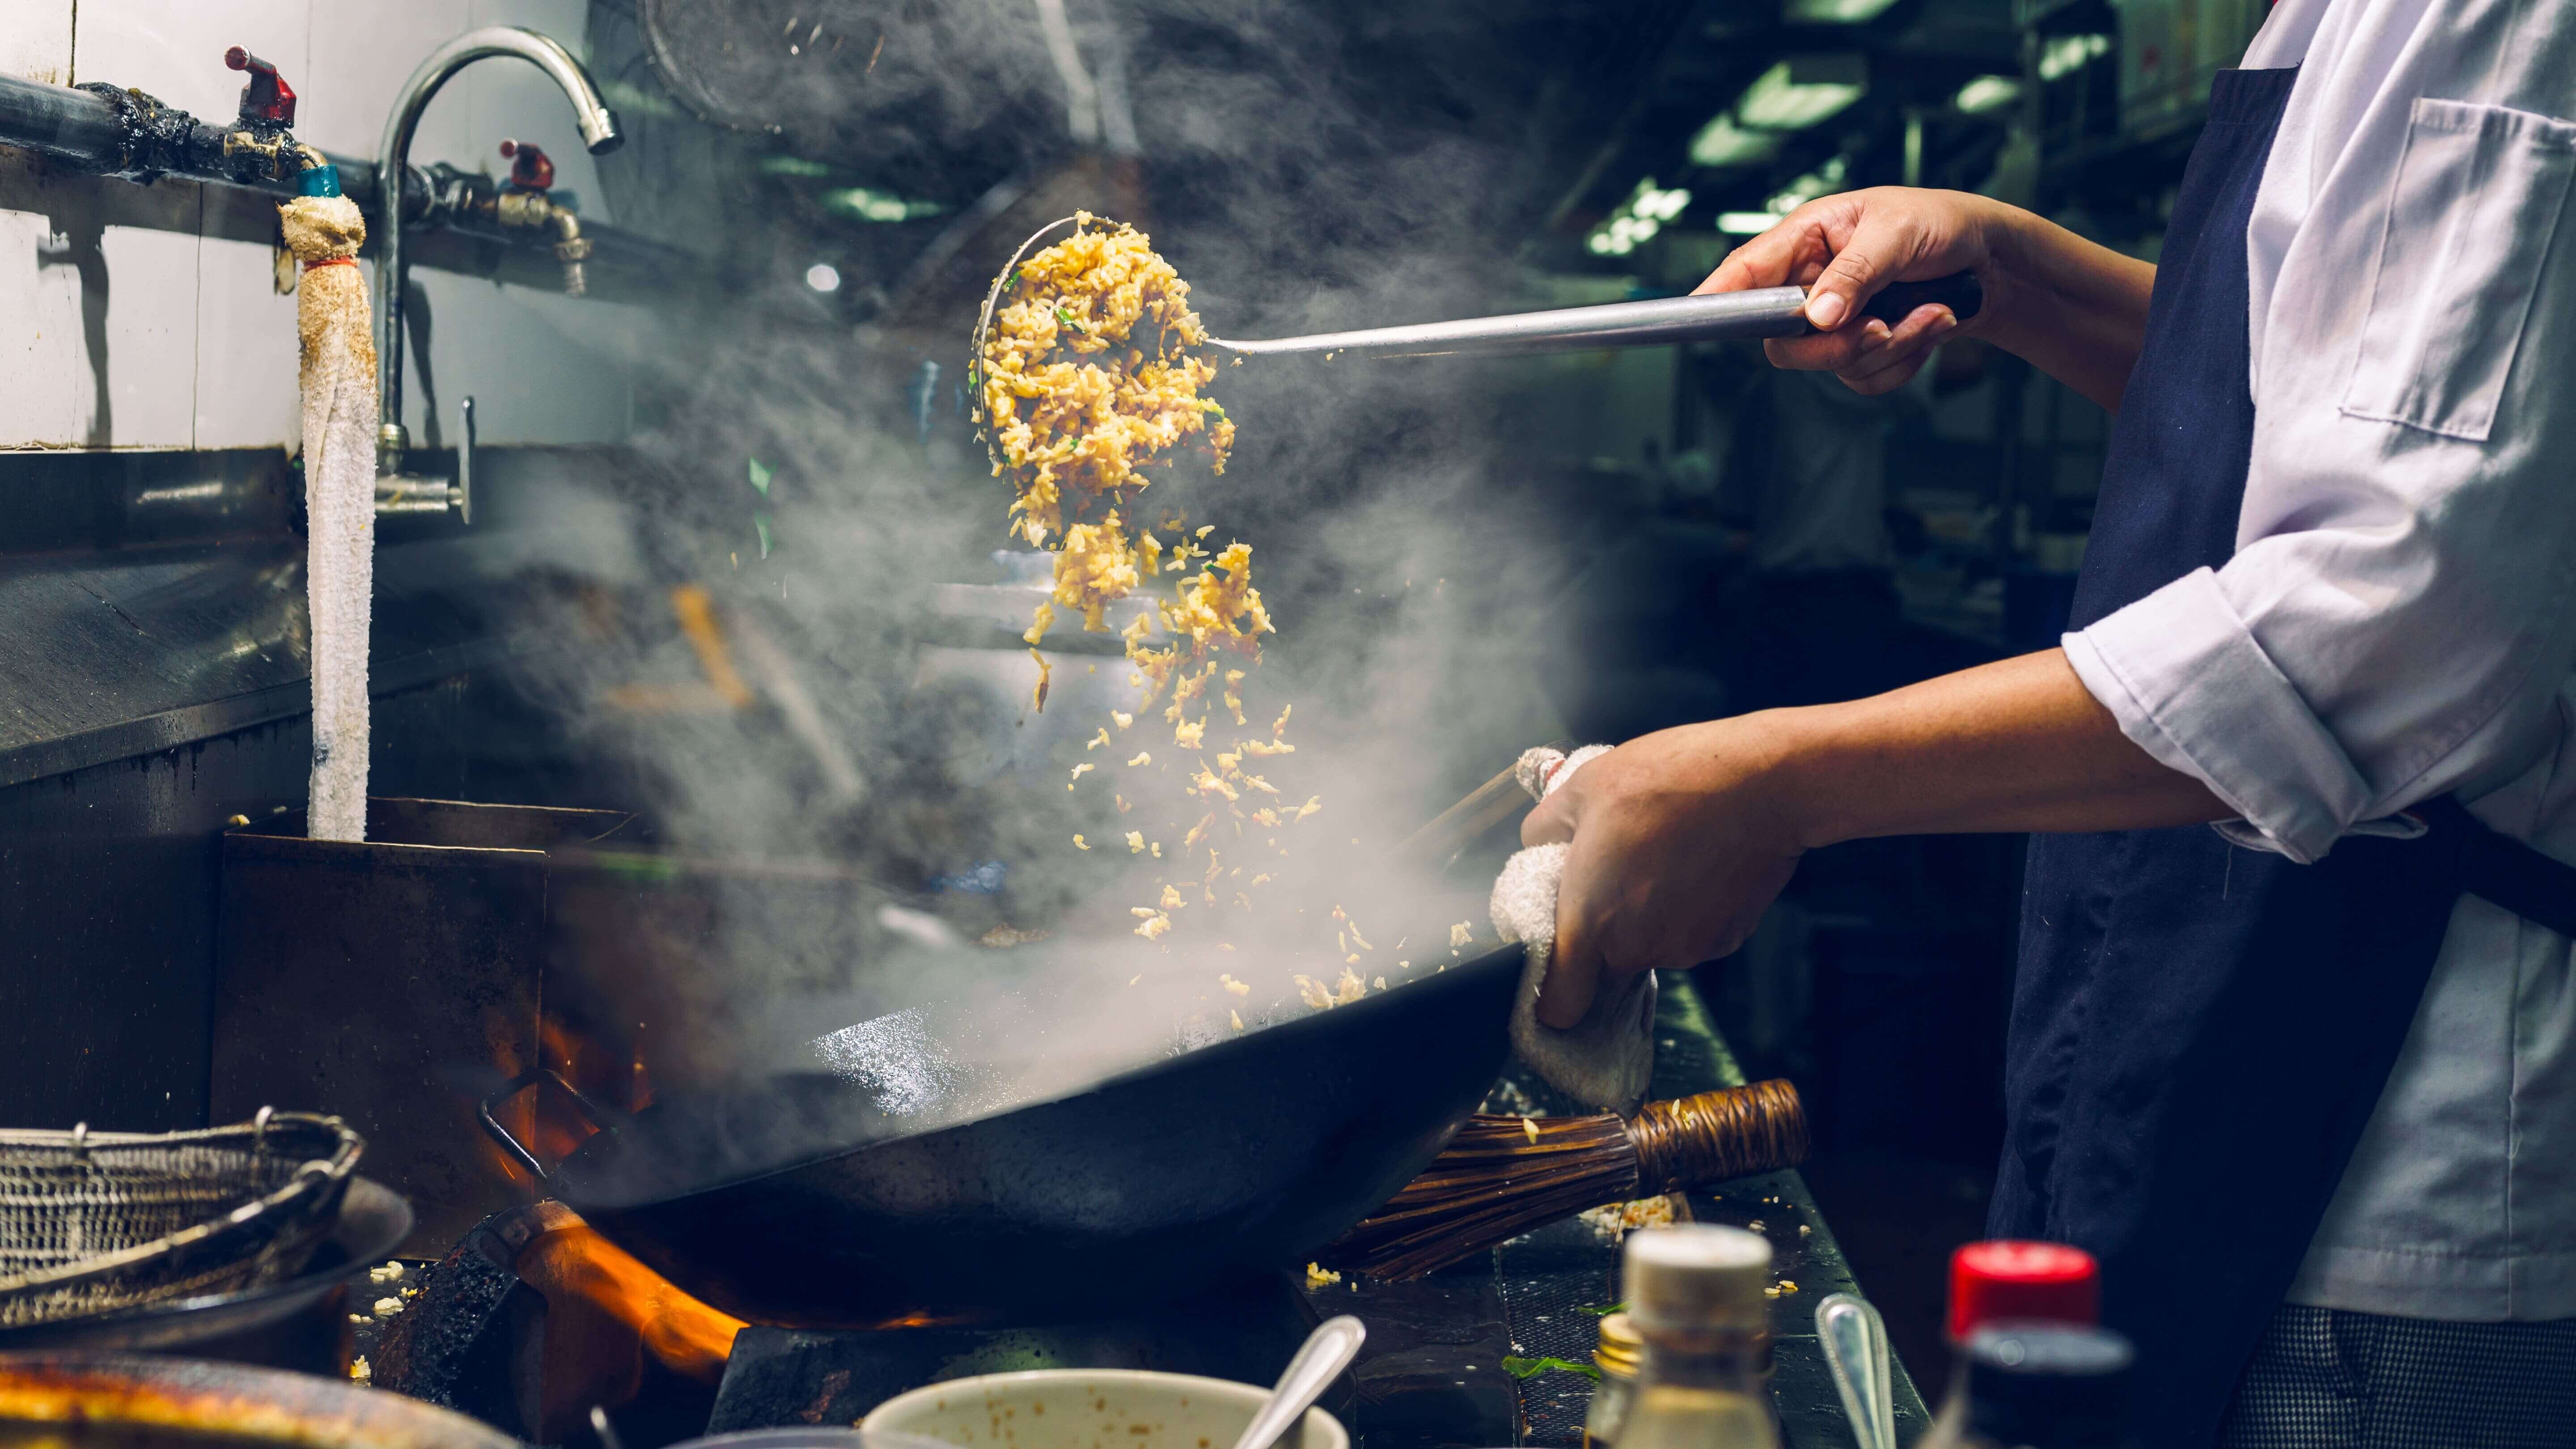 A cook making fried rice in a wok